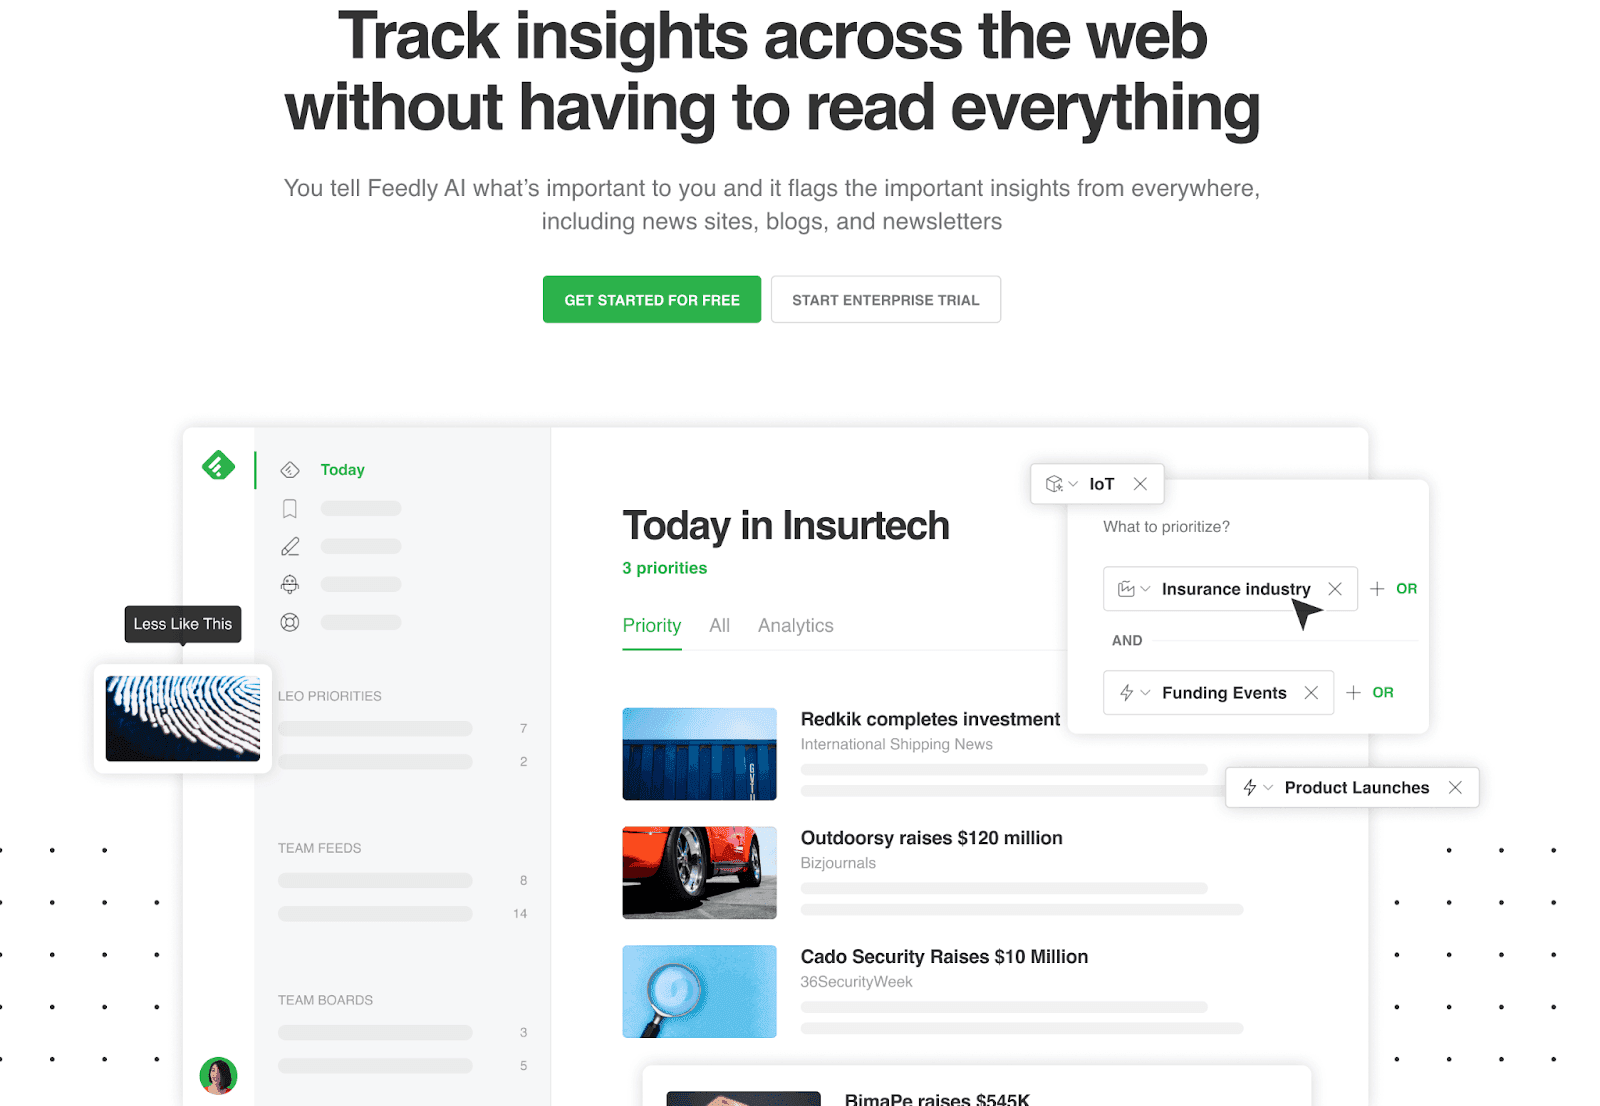 Feedly website with header "Track insights across the web without having to read everything"